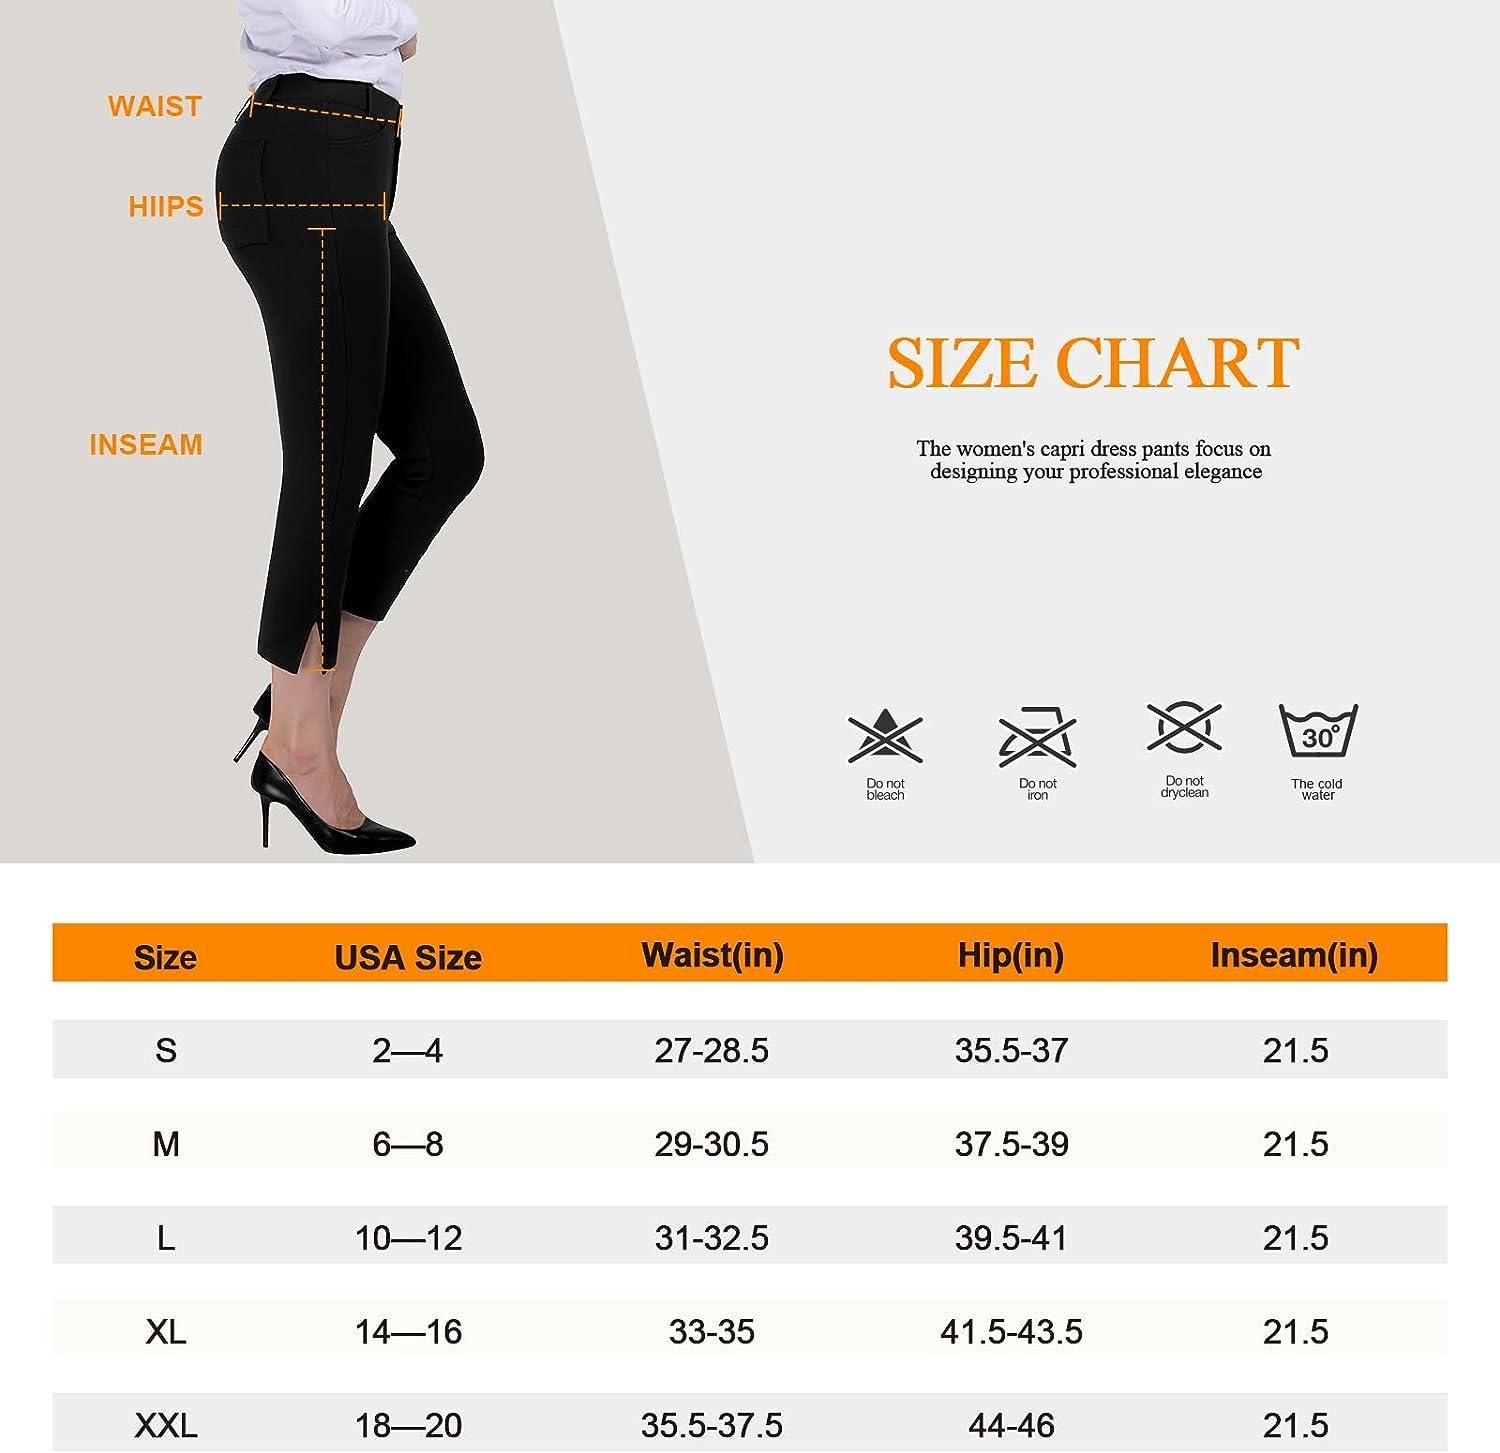 PUWEER Capri Pants for Women Dressy Business Casual Stretchy Slim Straight  Womens Dress Pants with Pockets Black Large